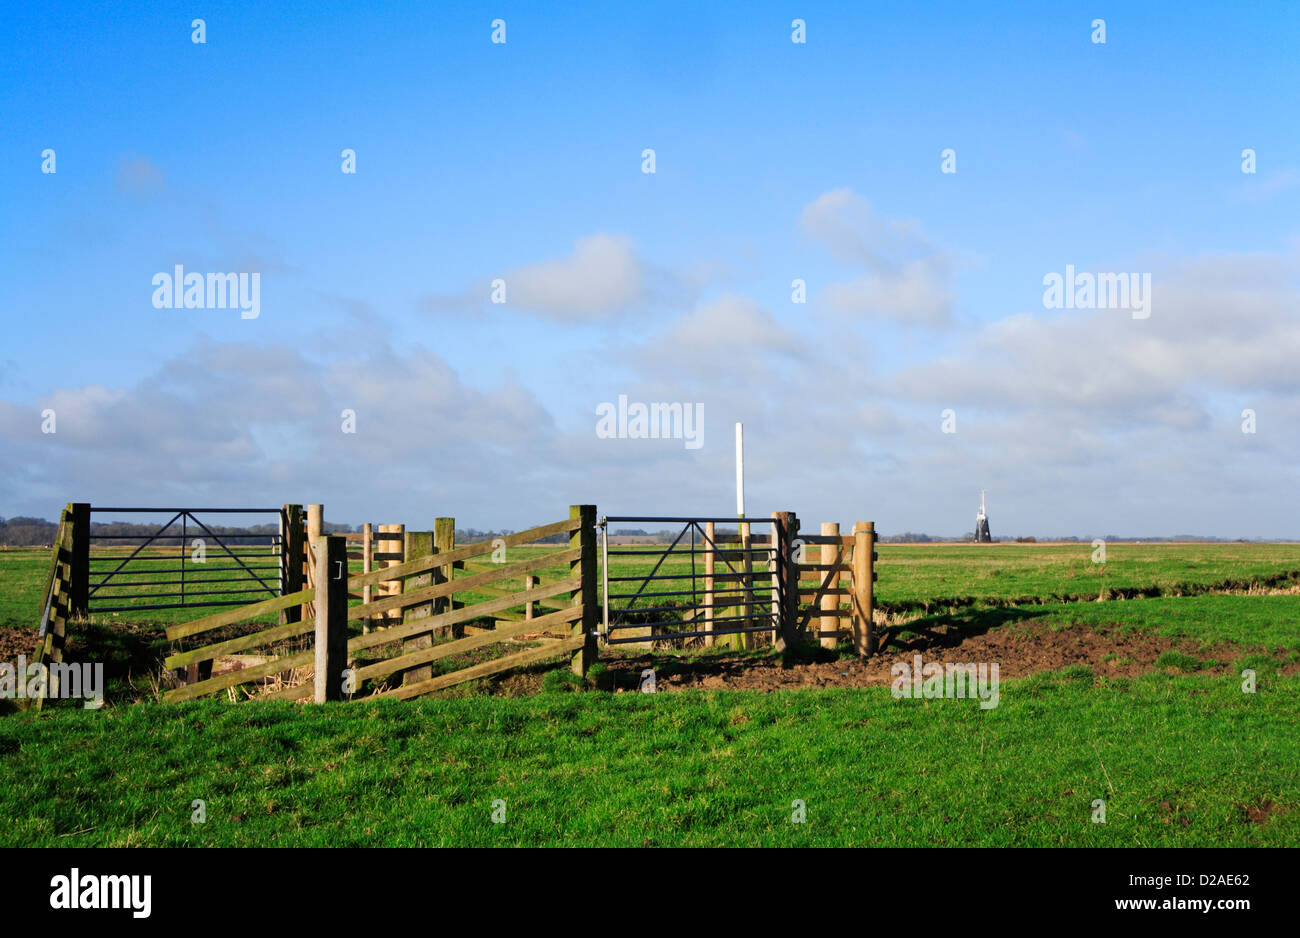 Farm gateways and access gate for the Weavers Way crossing a drainage ditch by Halvergate Marshes, Norfolk, England, UK. Stock Photo